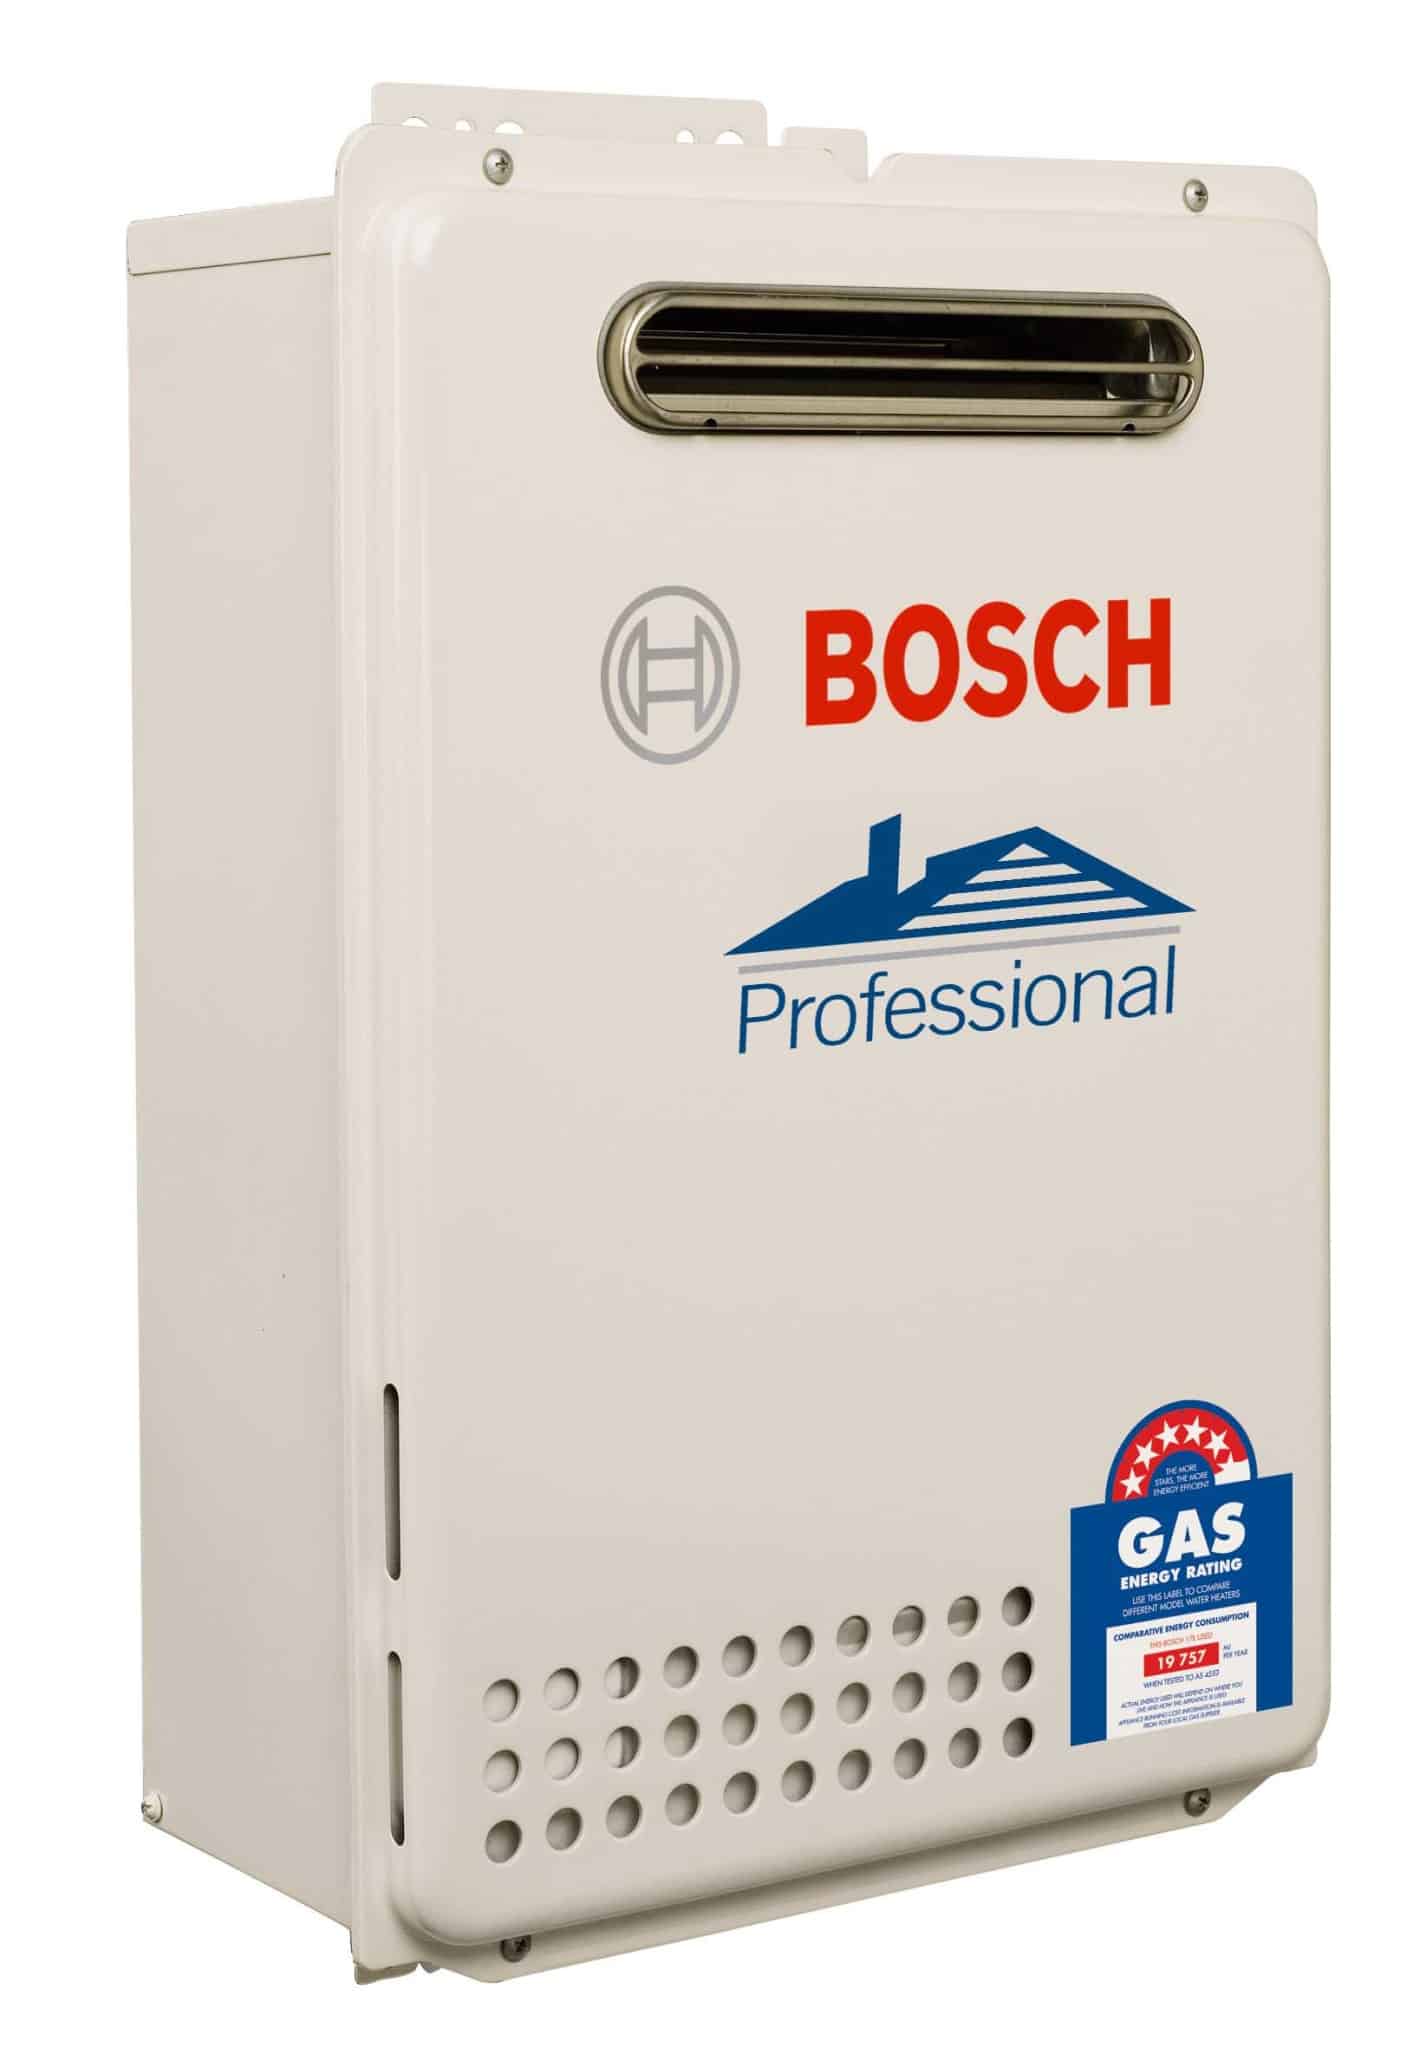 bosch-professional-hot-water-system-sa-hot-water